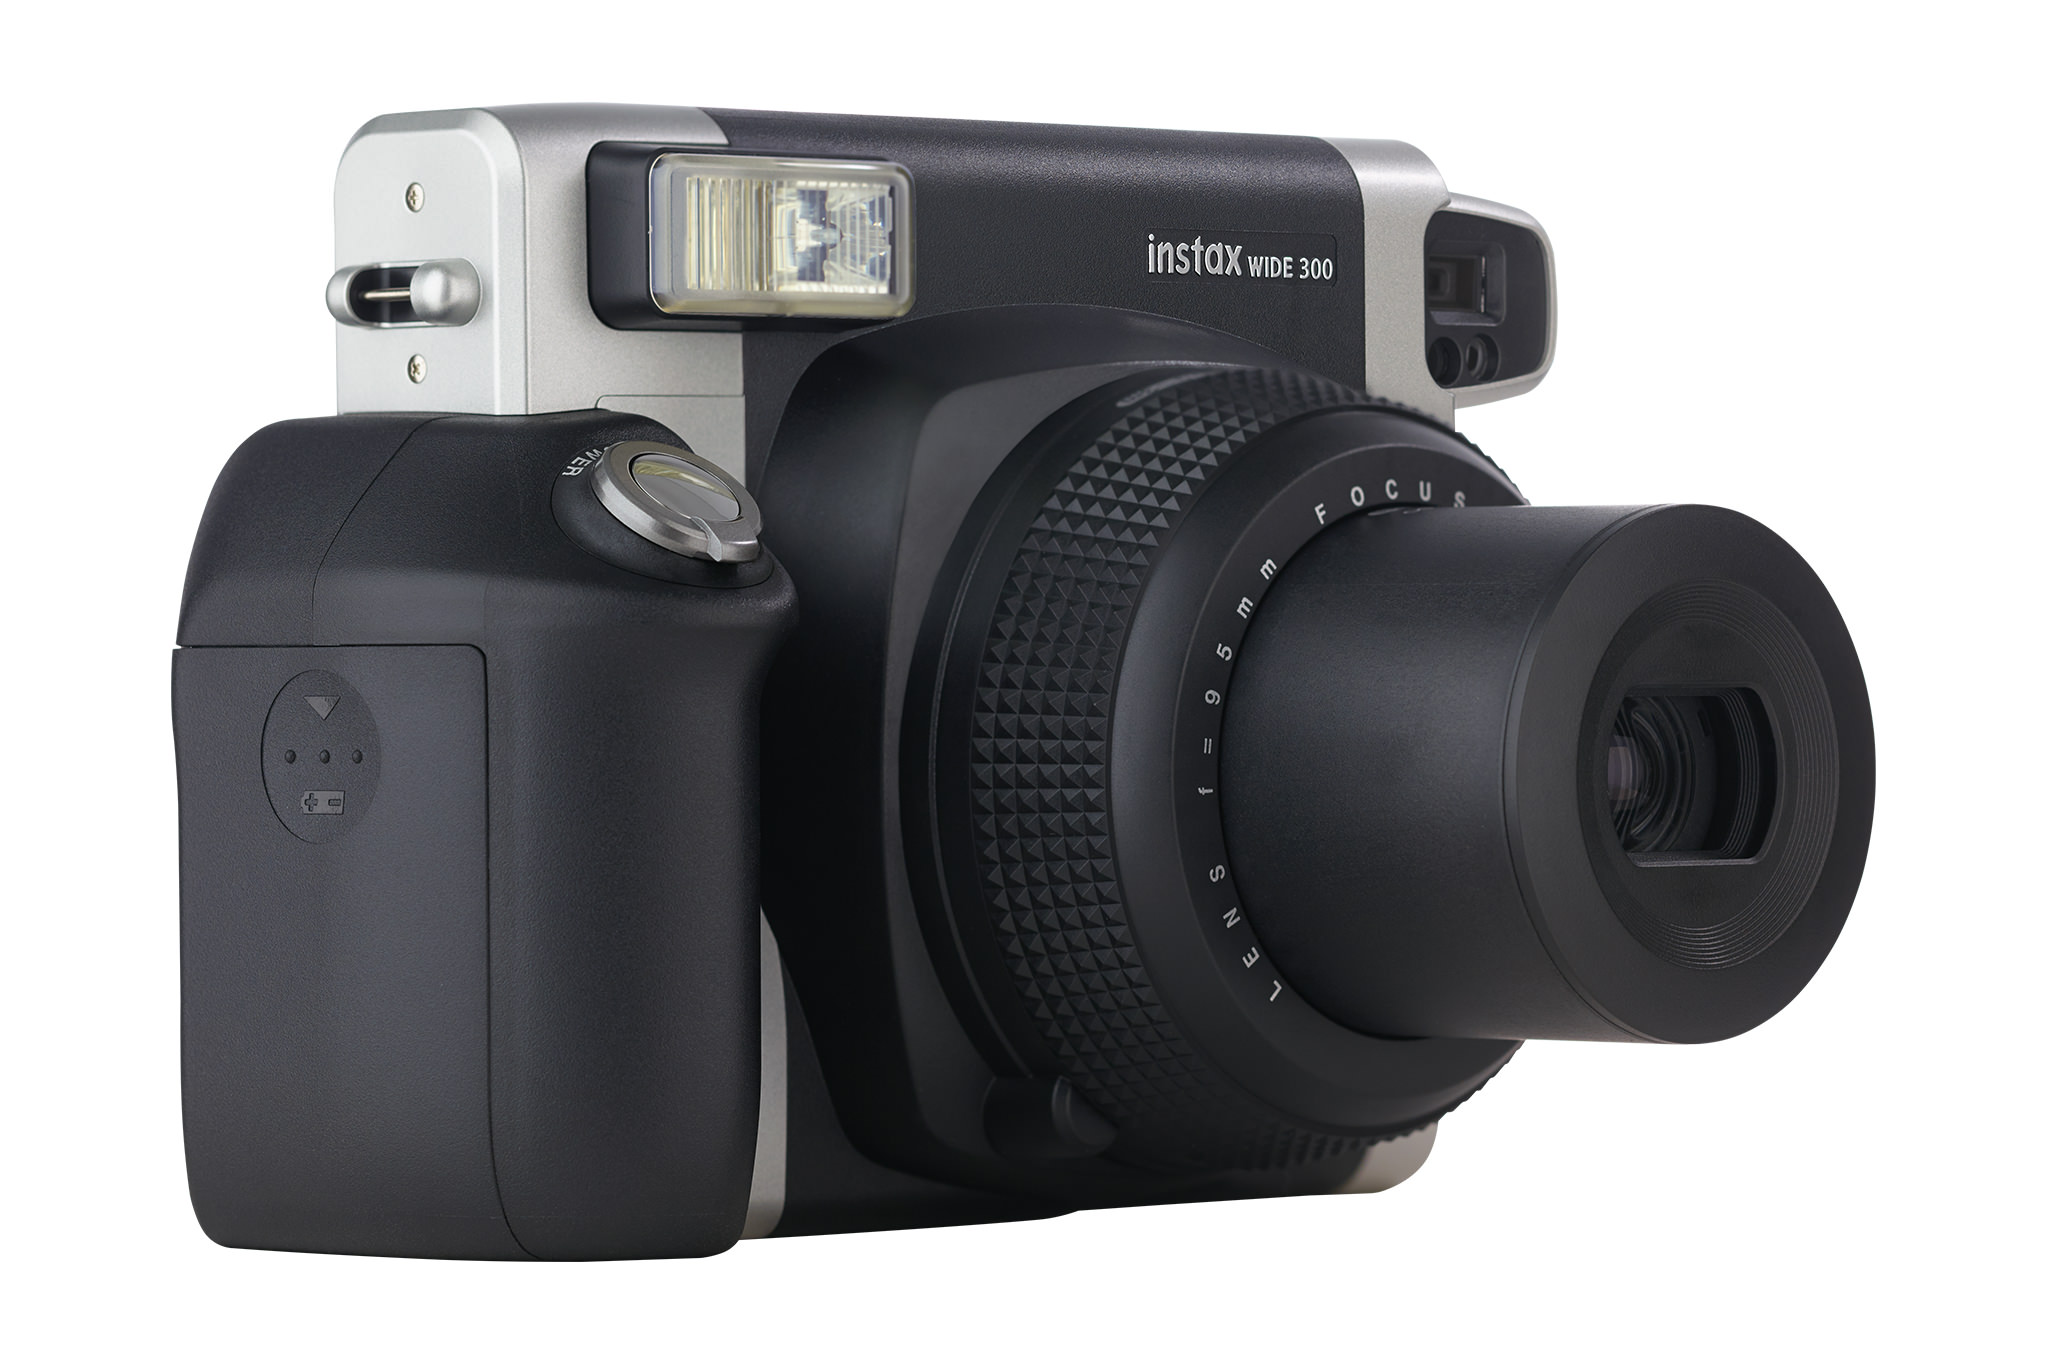 Fujifilm Instax Wide 300 - films and functions of the instant camera